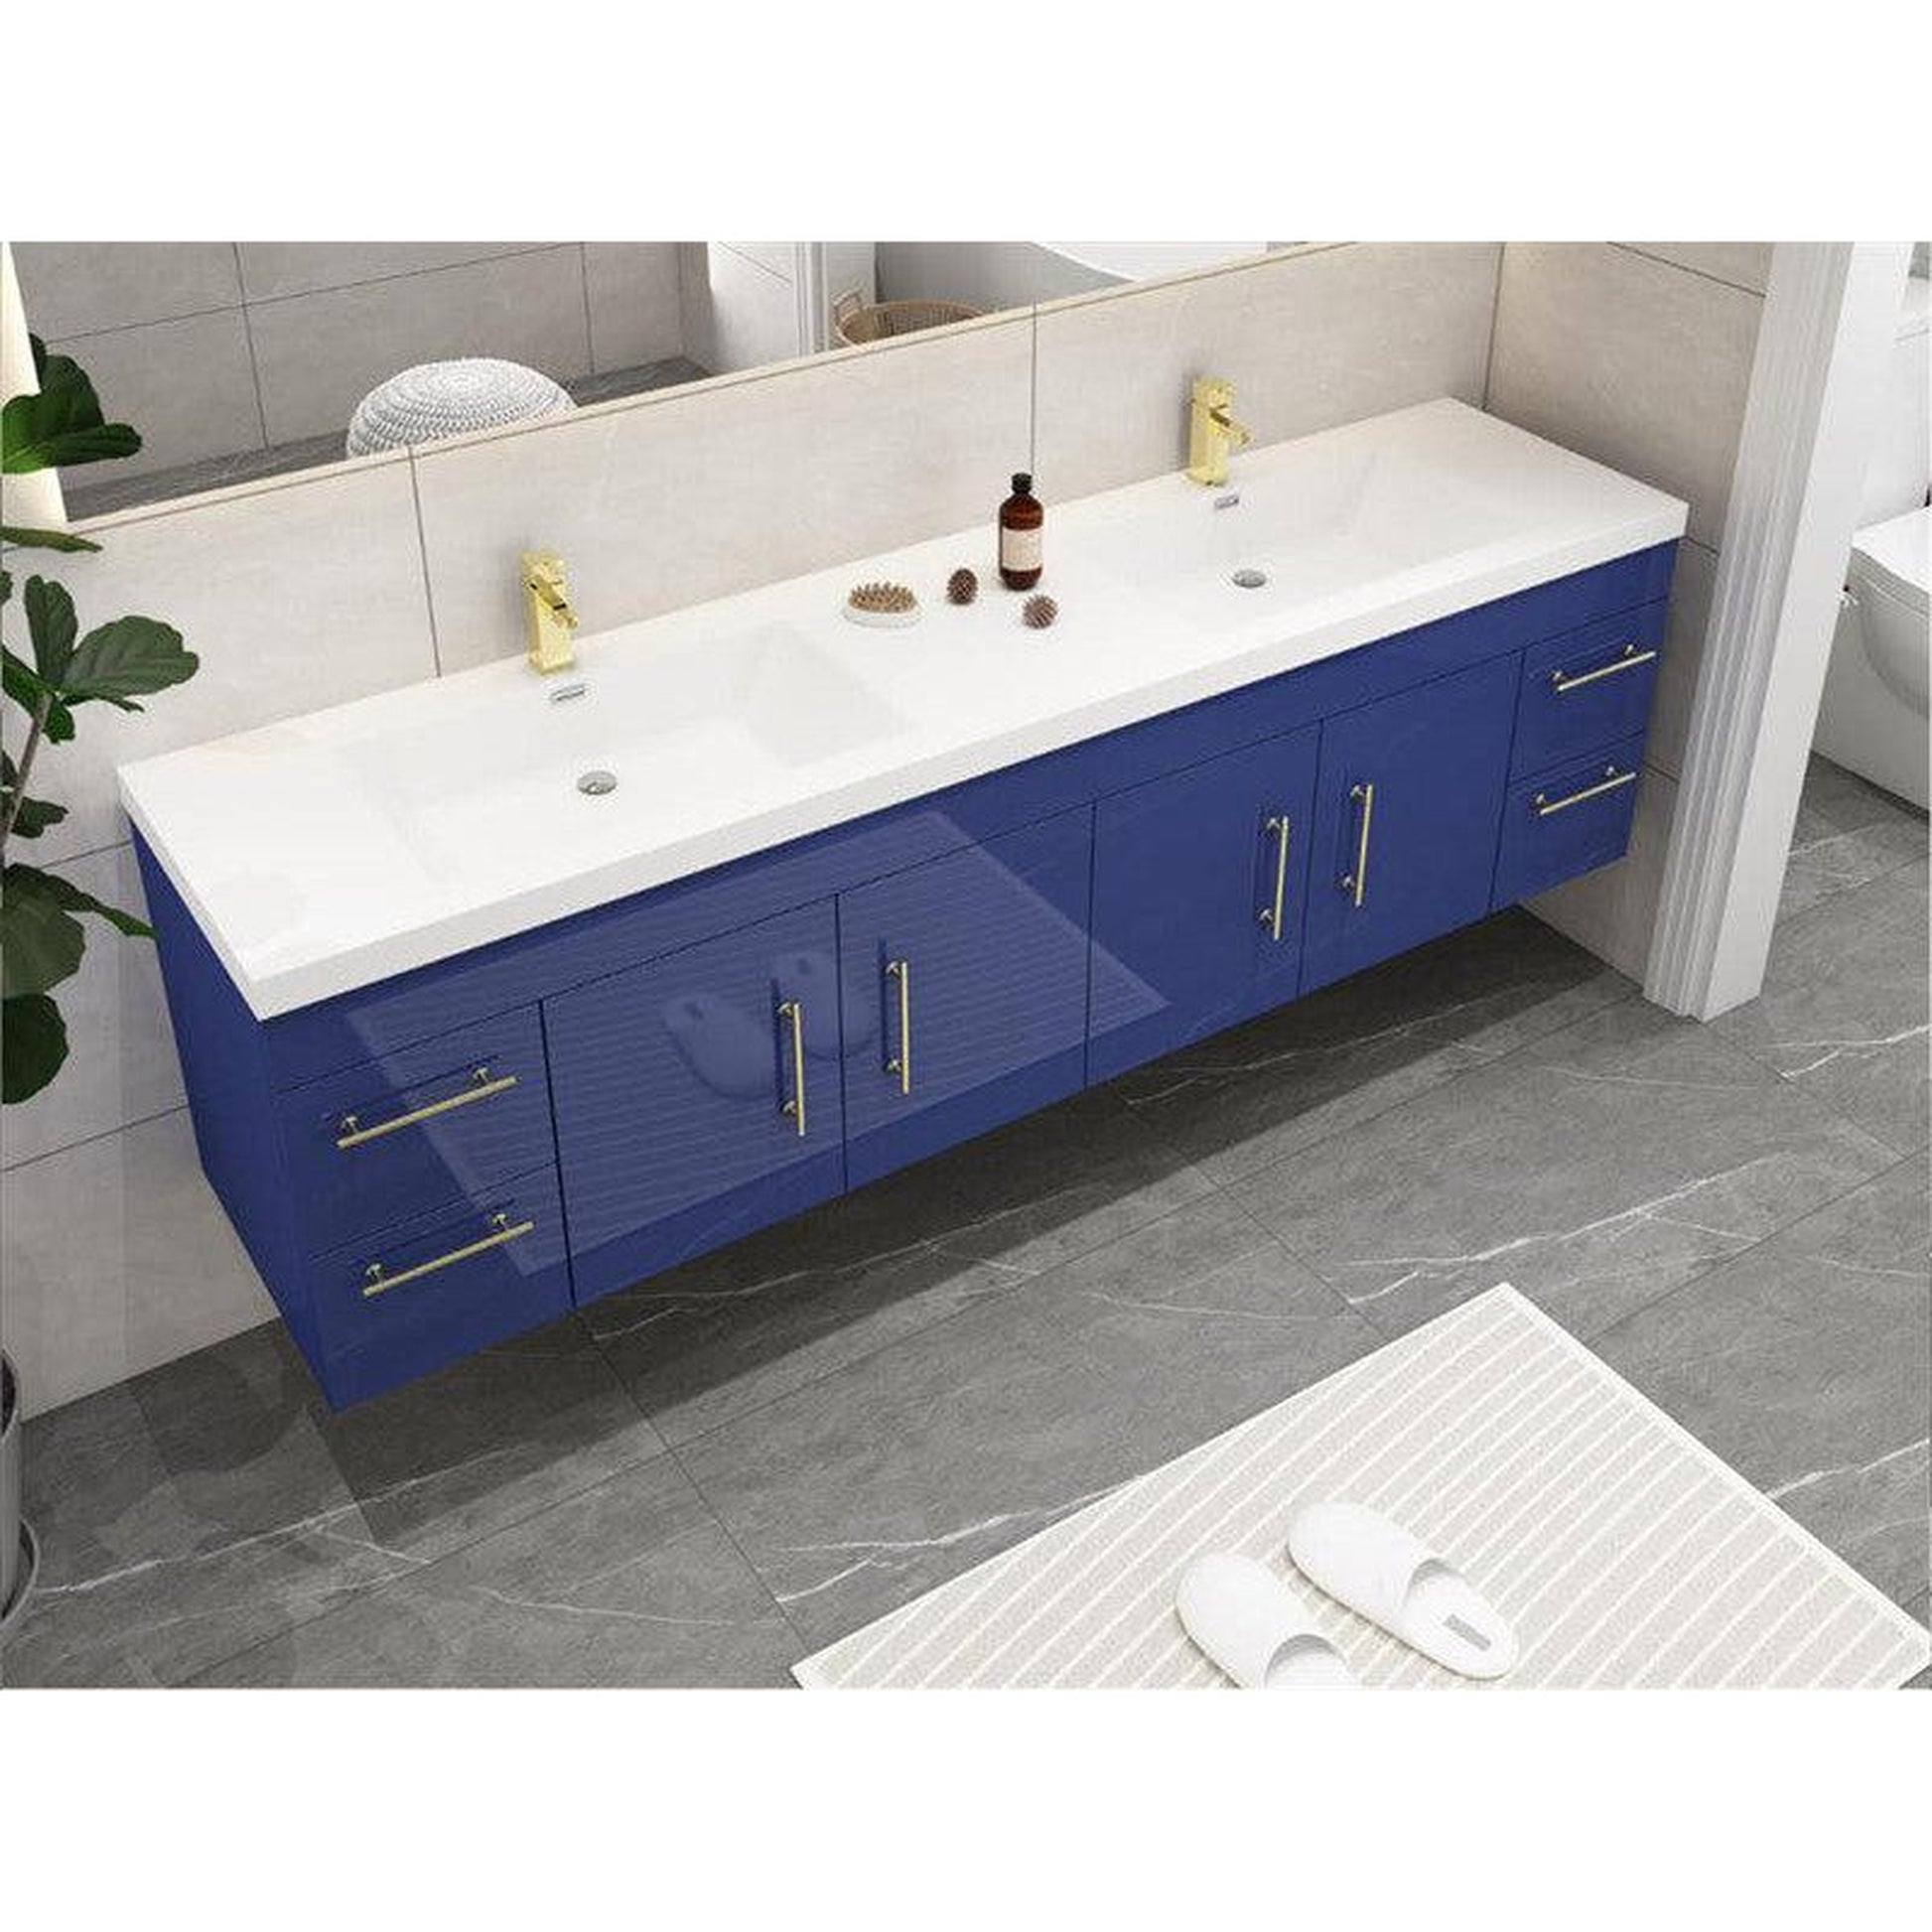 Moreno Bath ELSA 84" High Gloss Night Blue Wall-Mounted Vanity With Double Reinforced White Acrylic Sinks